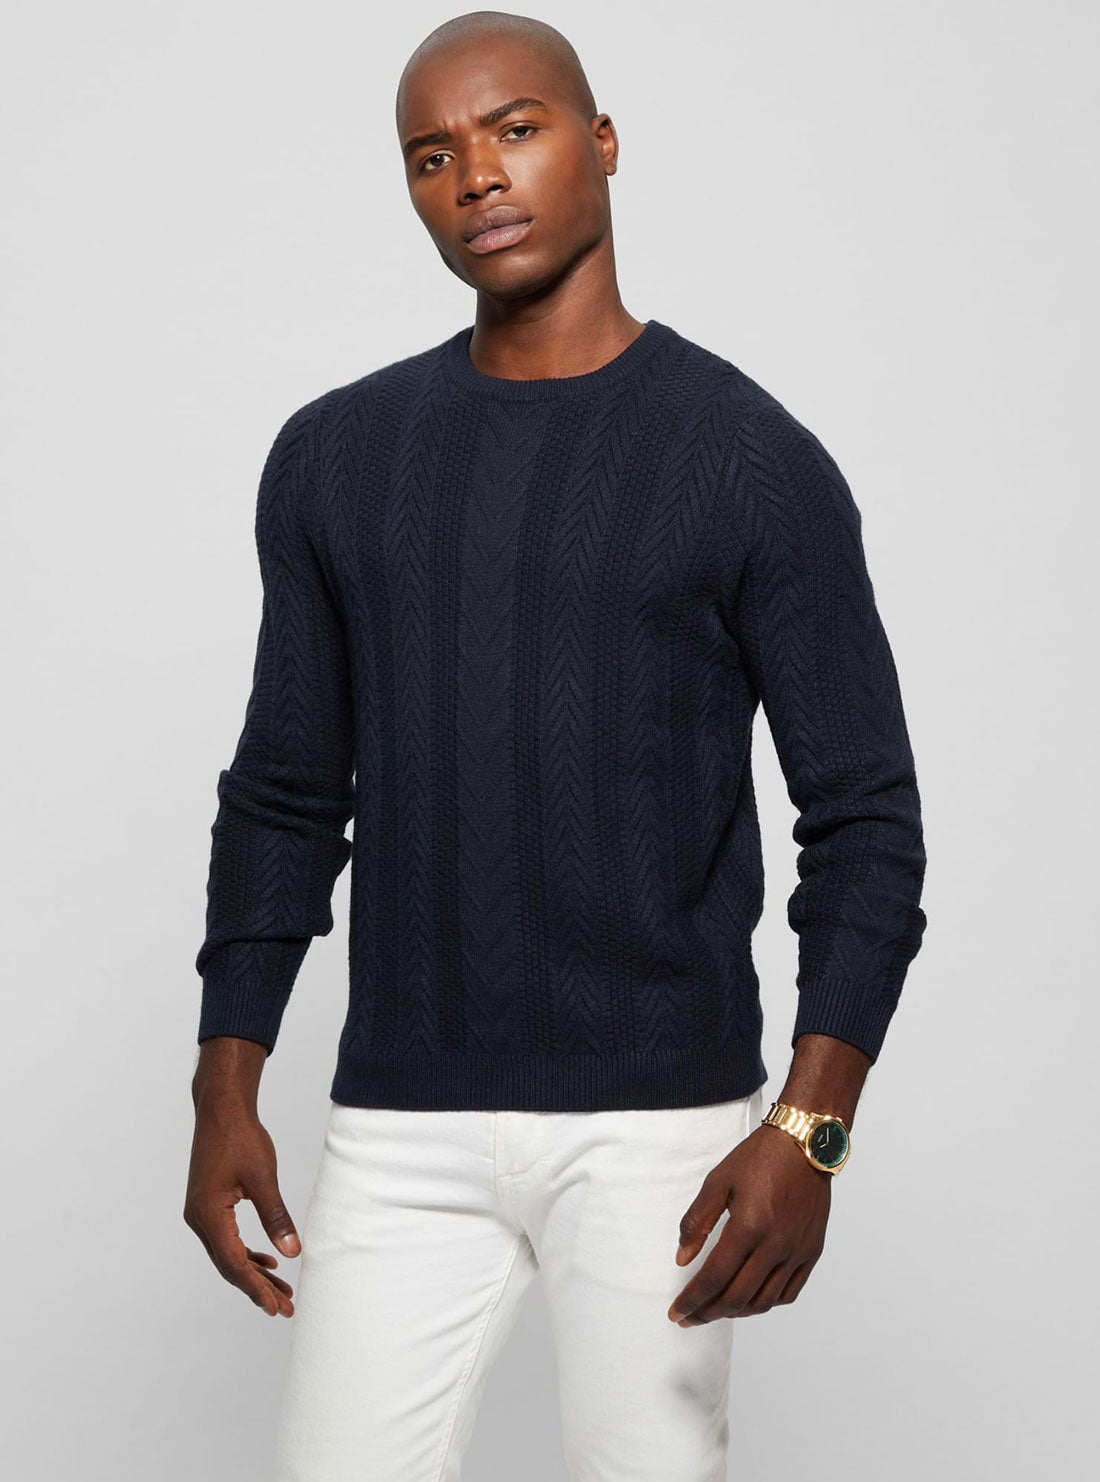 Navy Blue Cable Ethan Knit Top | GUESS Men's Apparel | Front view